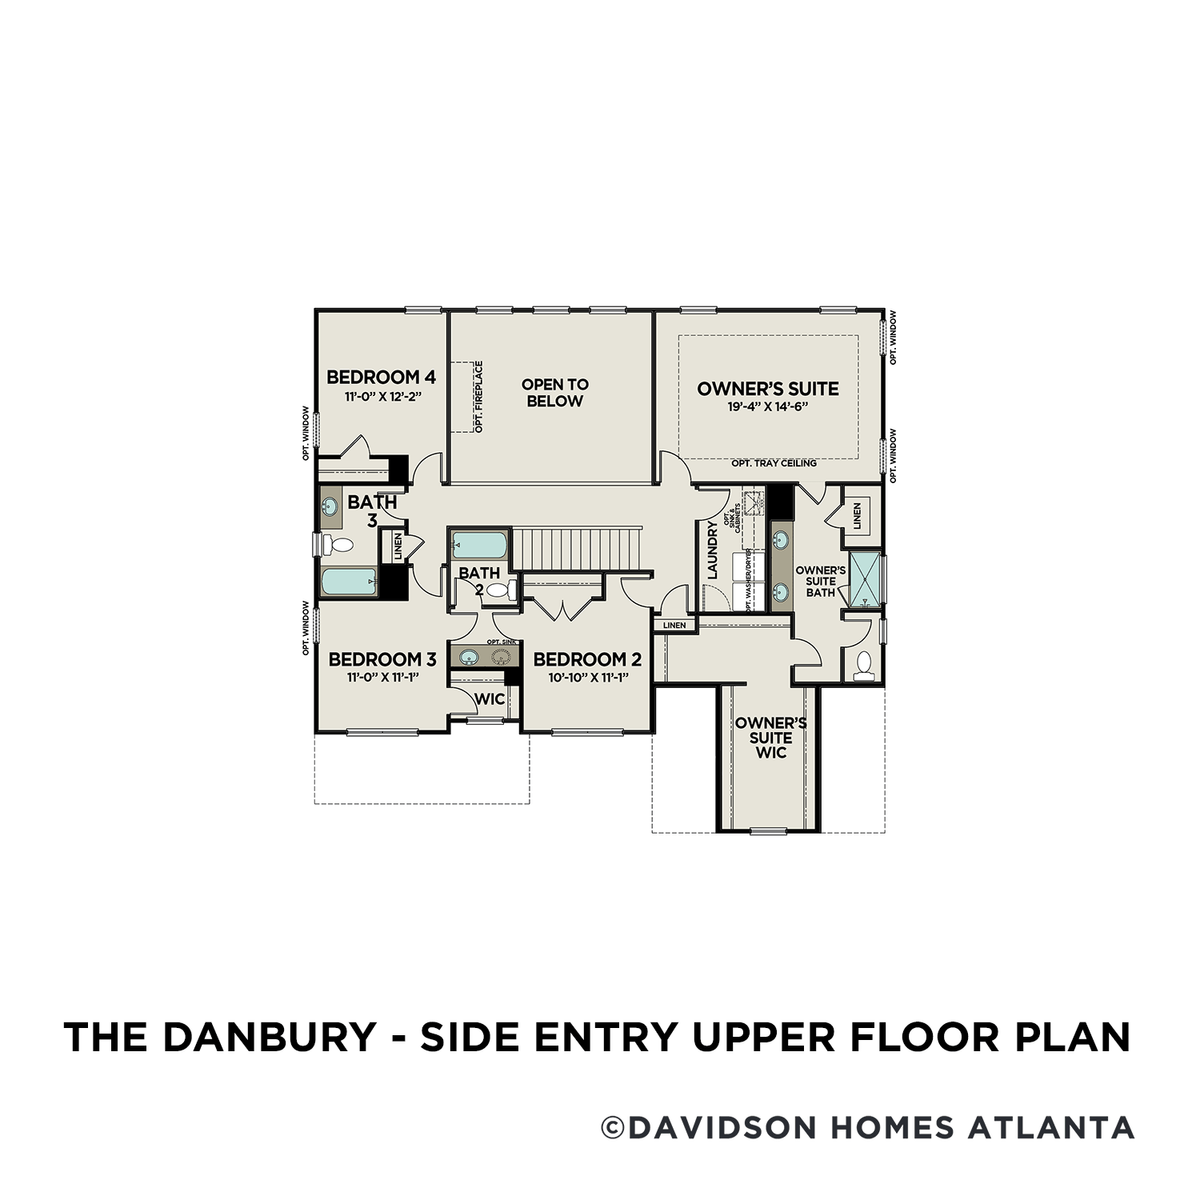 2 - The Danbury B – Side Entry floor plan layout for 208 Evetor Road in Davidson Homes' Everleigh community.